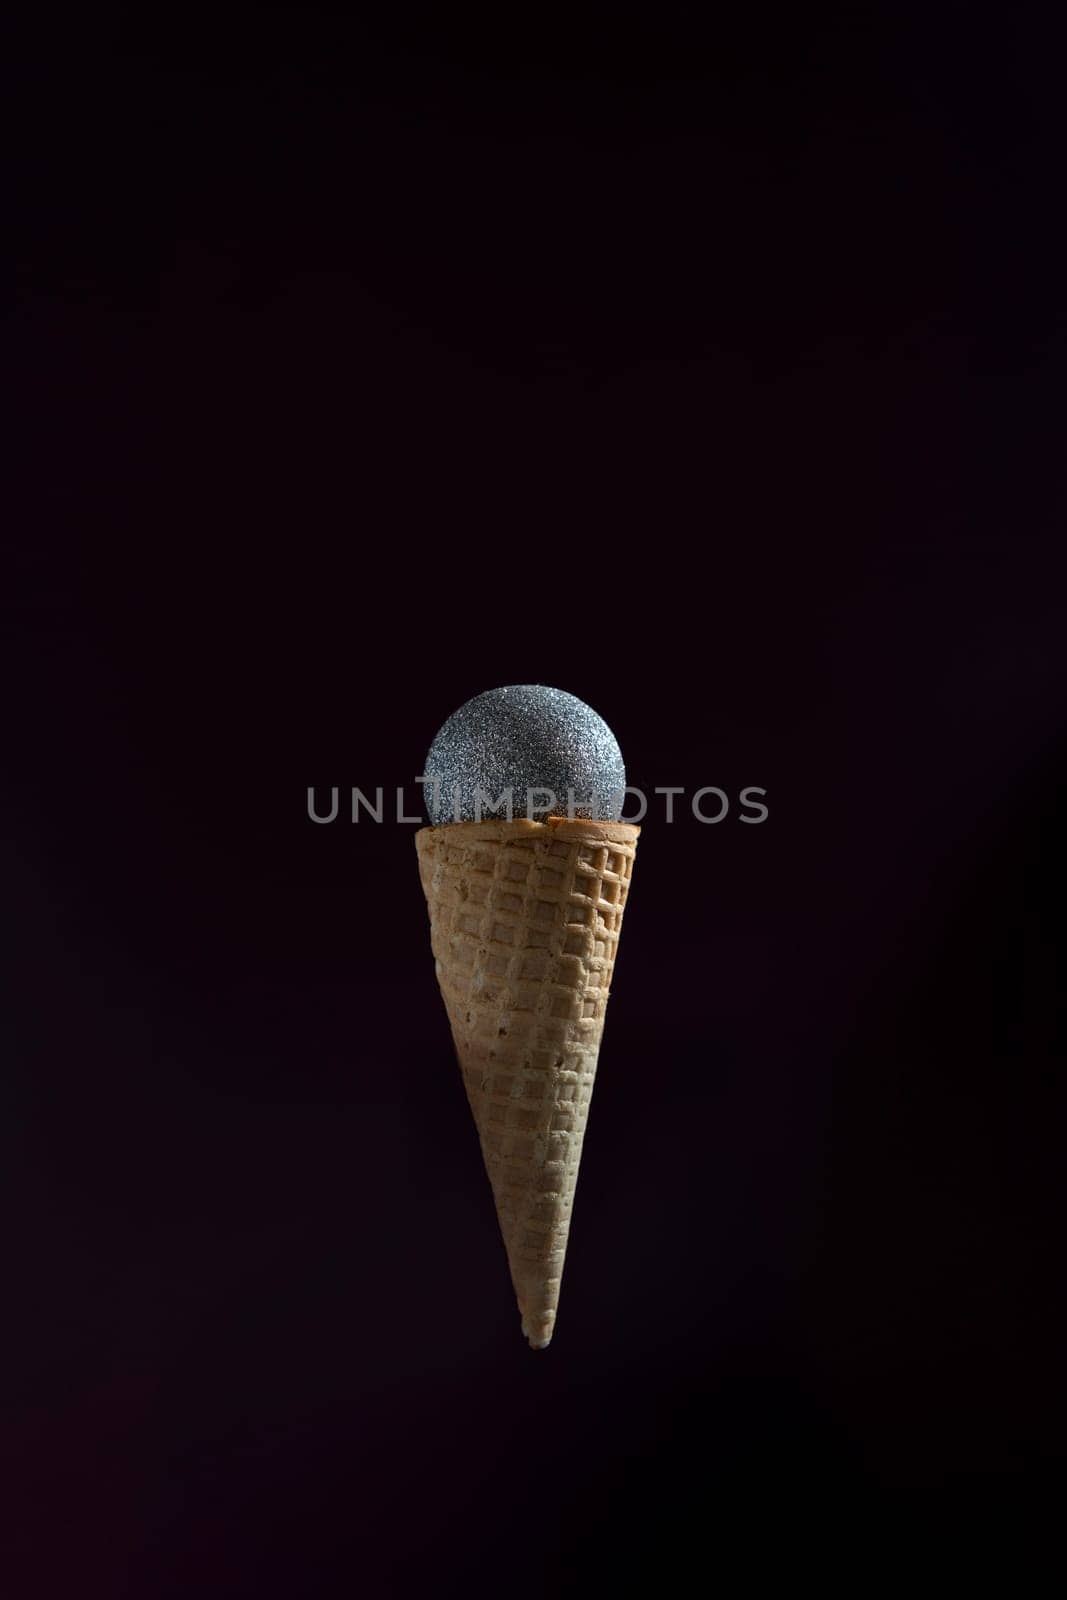 A microphone is placed inside of an ice cream cone. The cone is upside down and the microphone is suspended in the air. by Matiunina